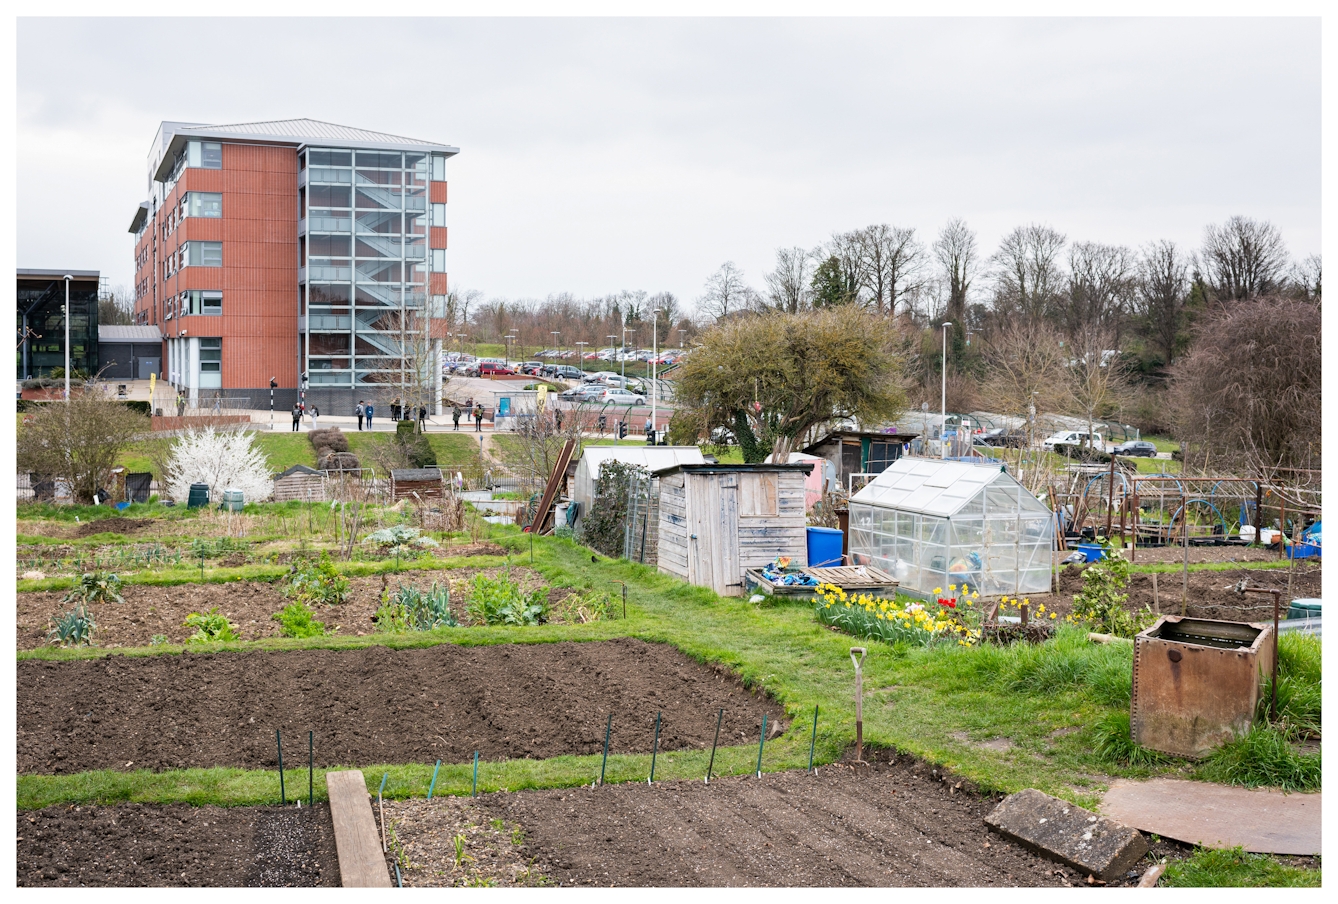 Photograph of an allotment site divided into different plots with grass pathways. In the background there is a large modern building made from red brick and glass to the top left of the image. In the bottom right there is a small rundown shed and a greenhouse, next to which is a small crop of bright yellow daffodils.